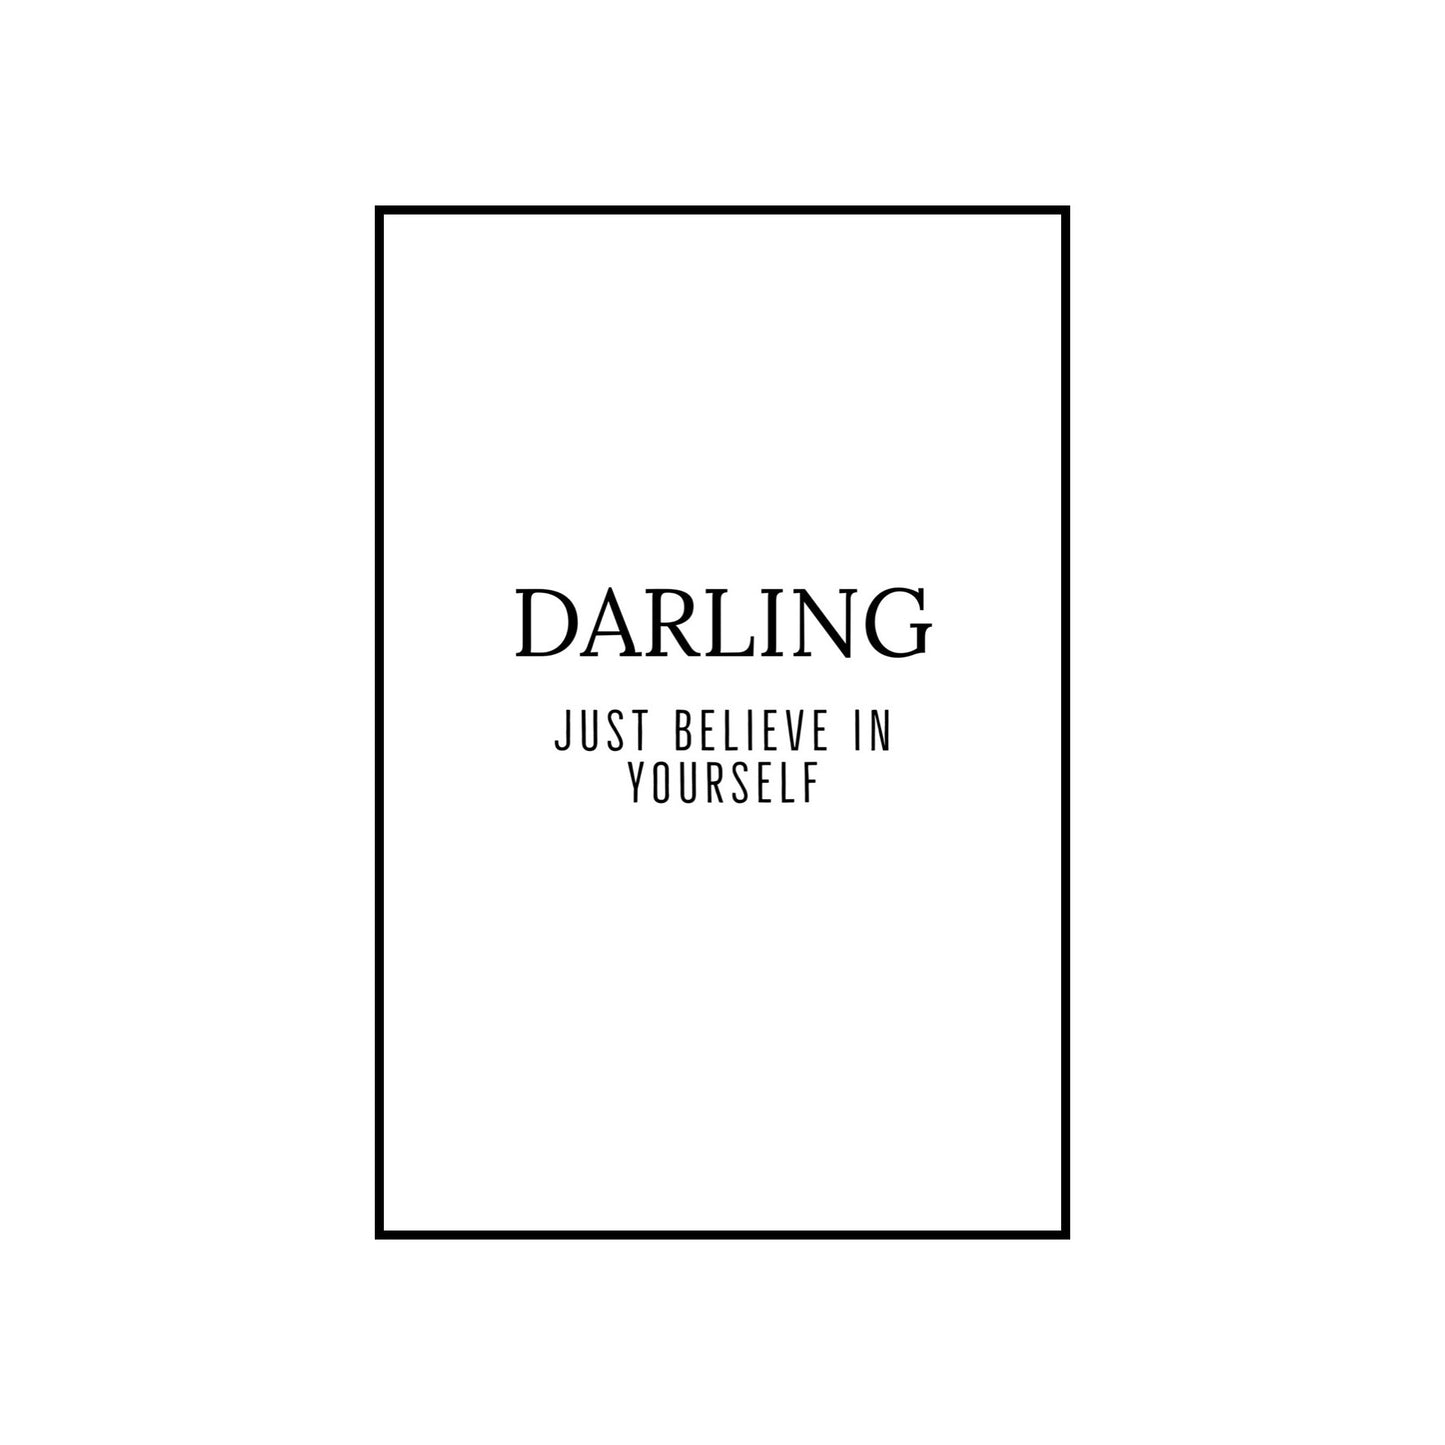 darling just believe in yourself - THE WALL STYLIST